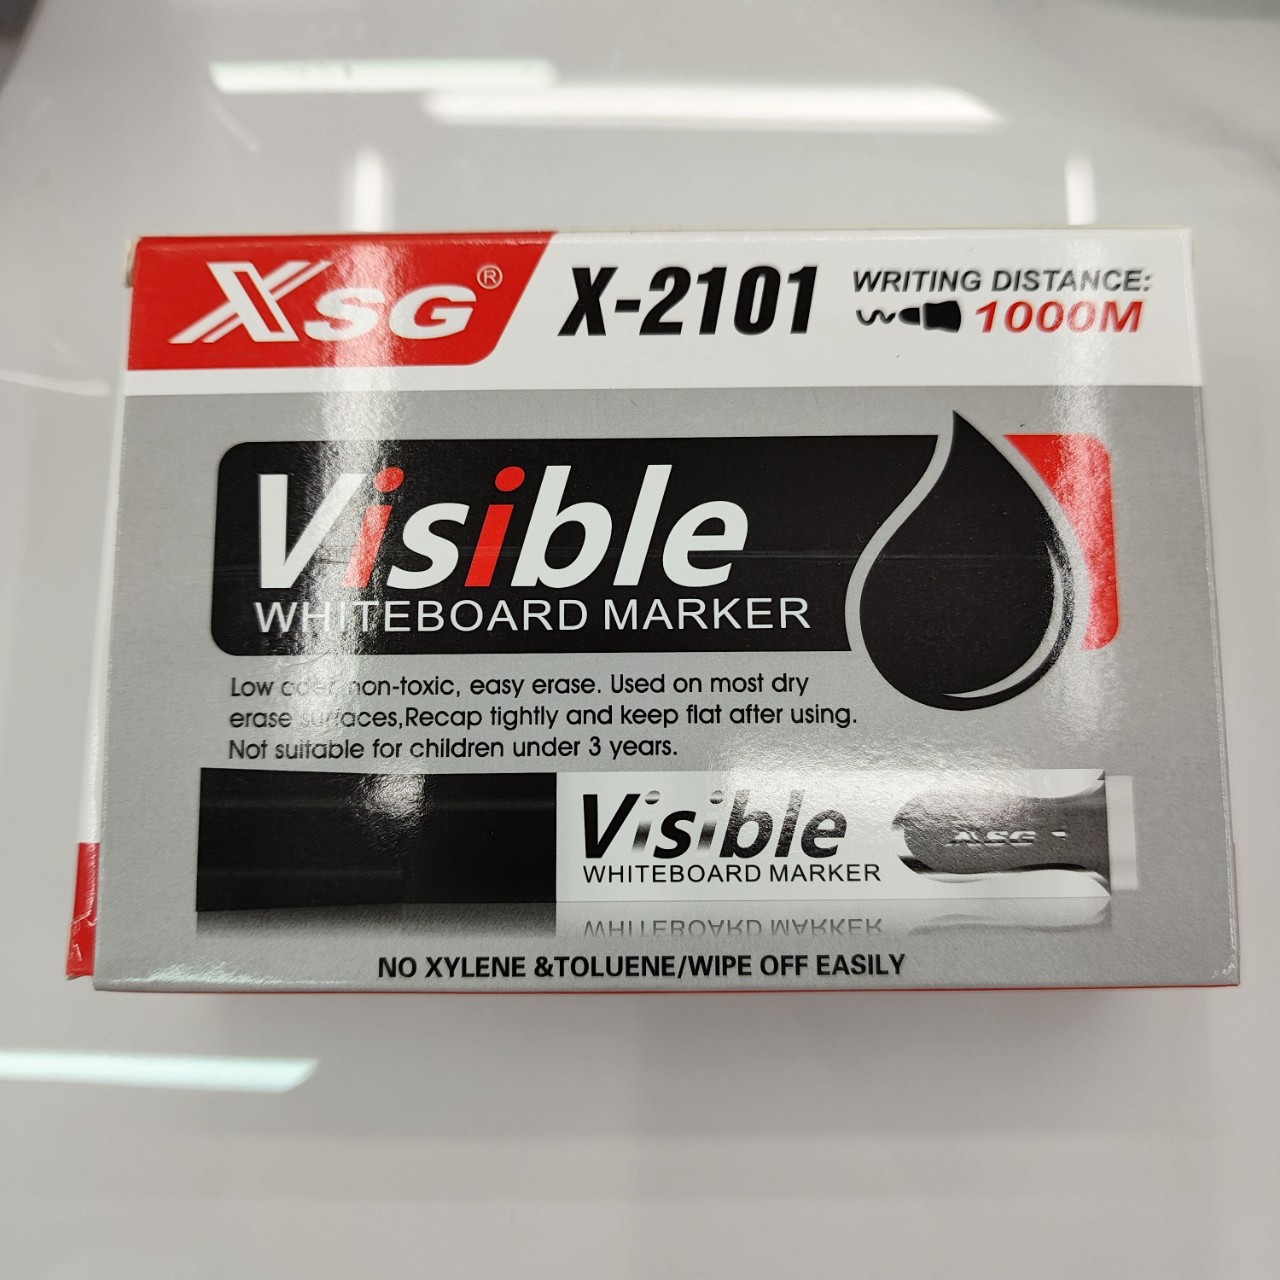 XSG Visible X-2101 WHITEBOARD MARKER 白板笔